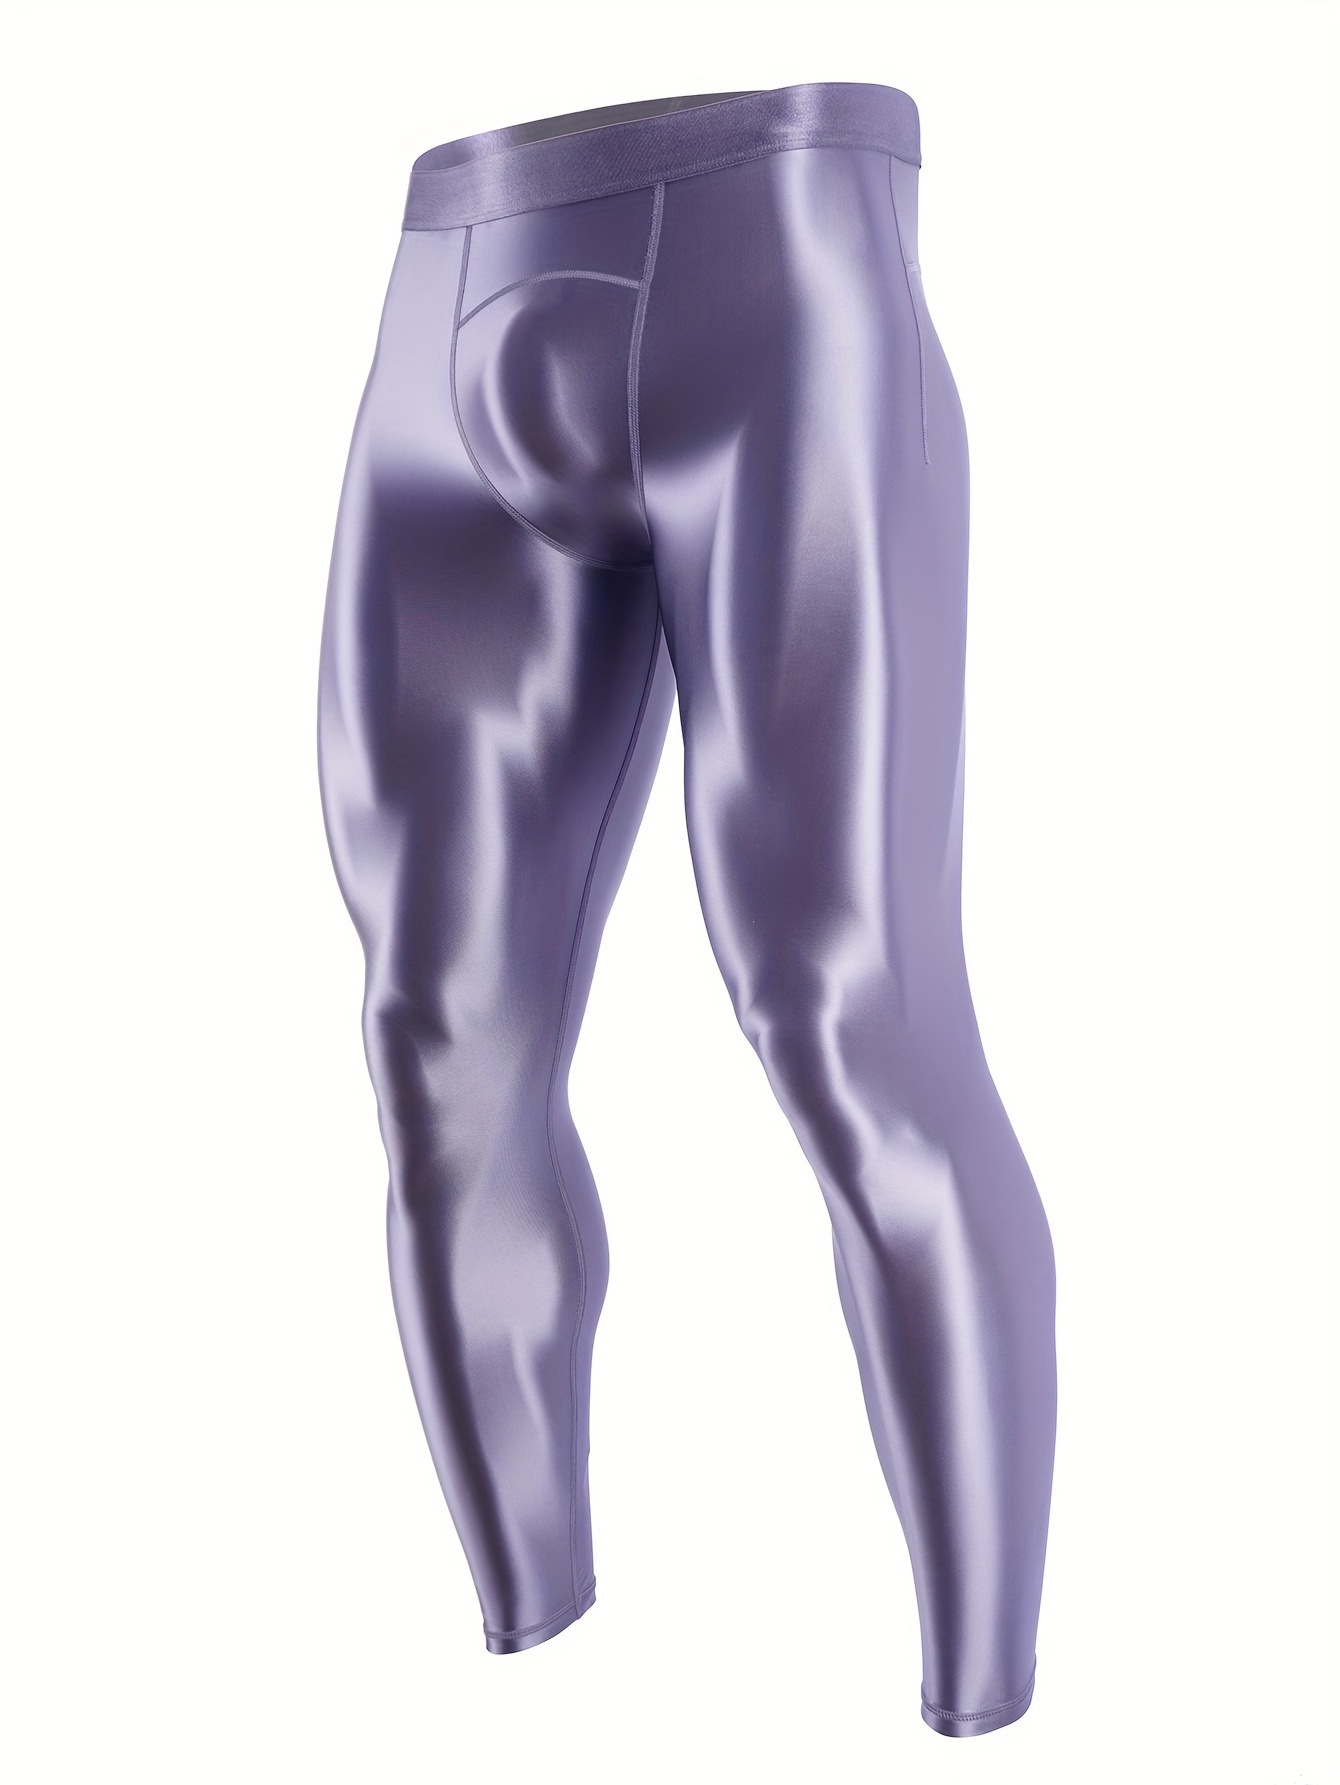 Mens Long Pants Glossy Pantyhose Yoga Workout Sports Trousers Tights